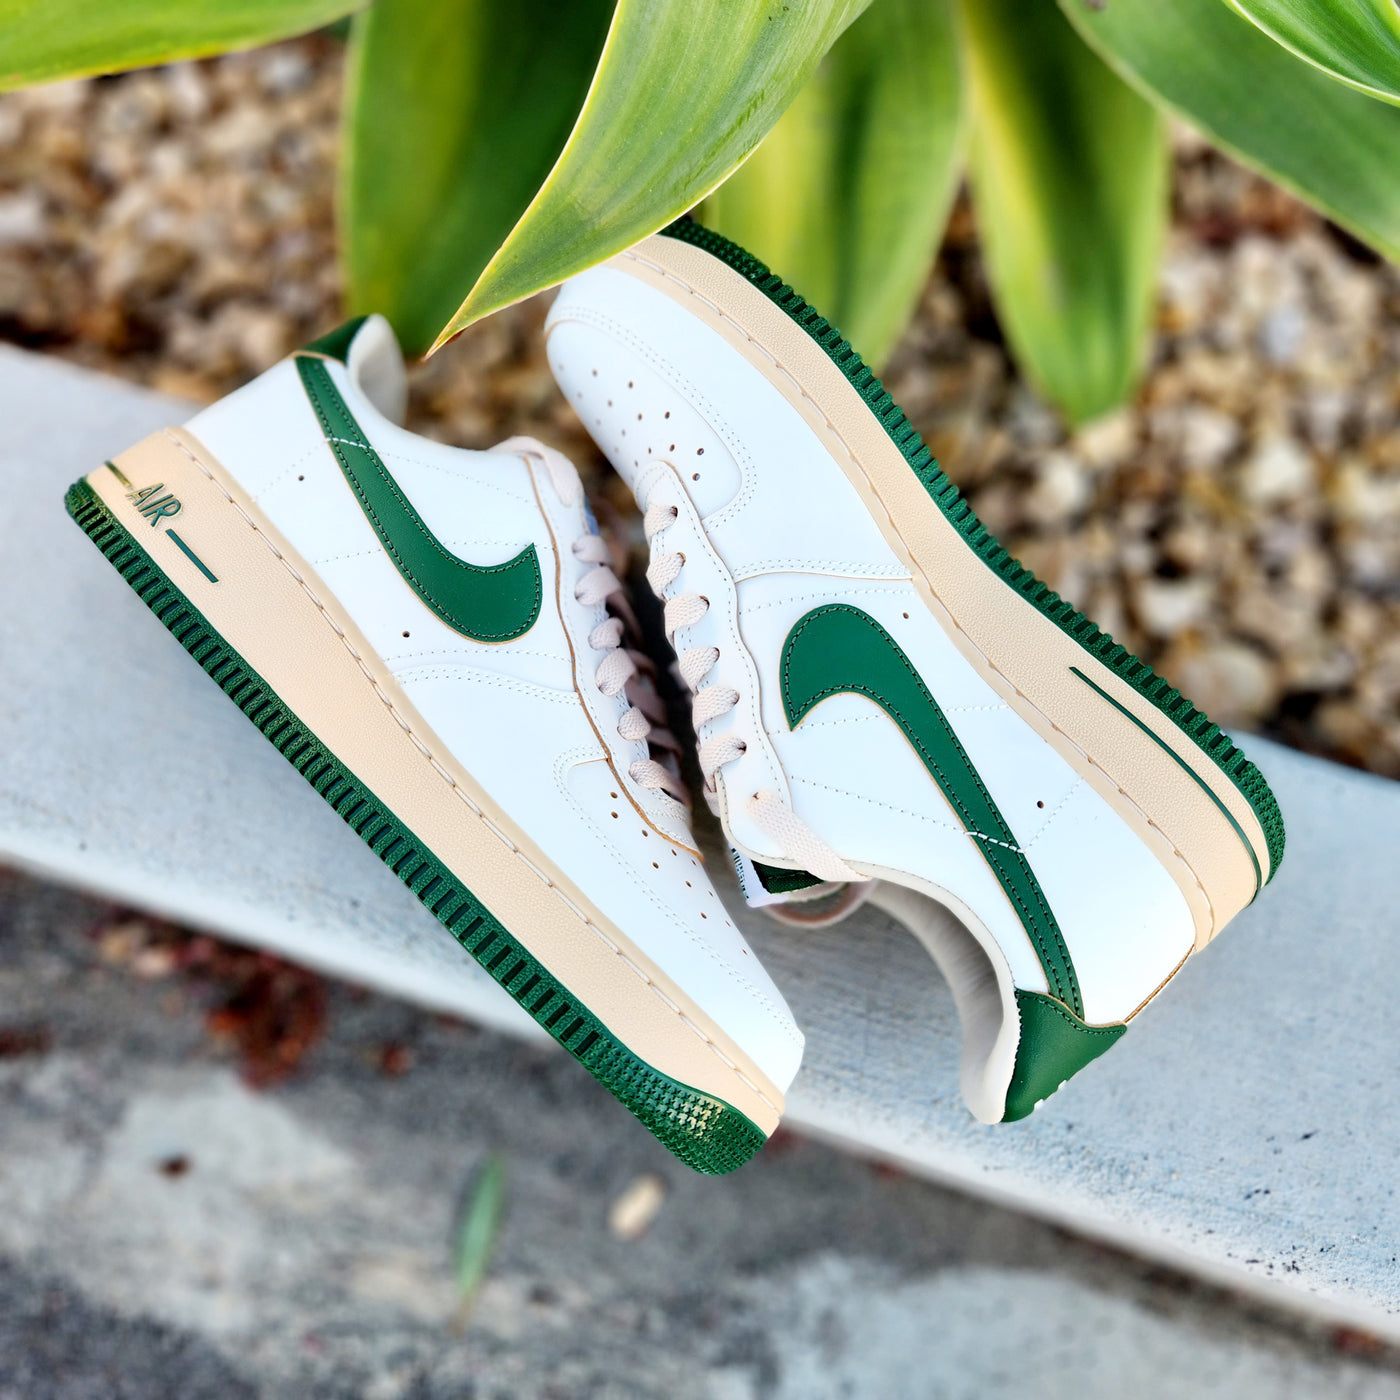 This Nike Air Force 1 Low Sail Gorge Green Has Strong Vintage Vibes -  Sneaker News